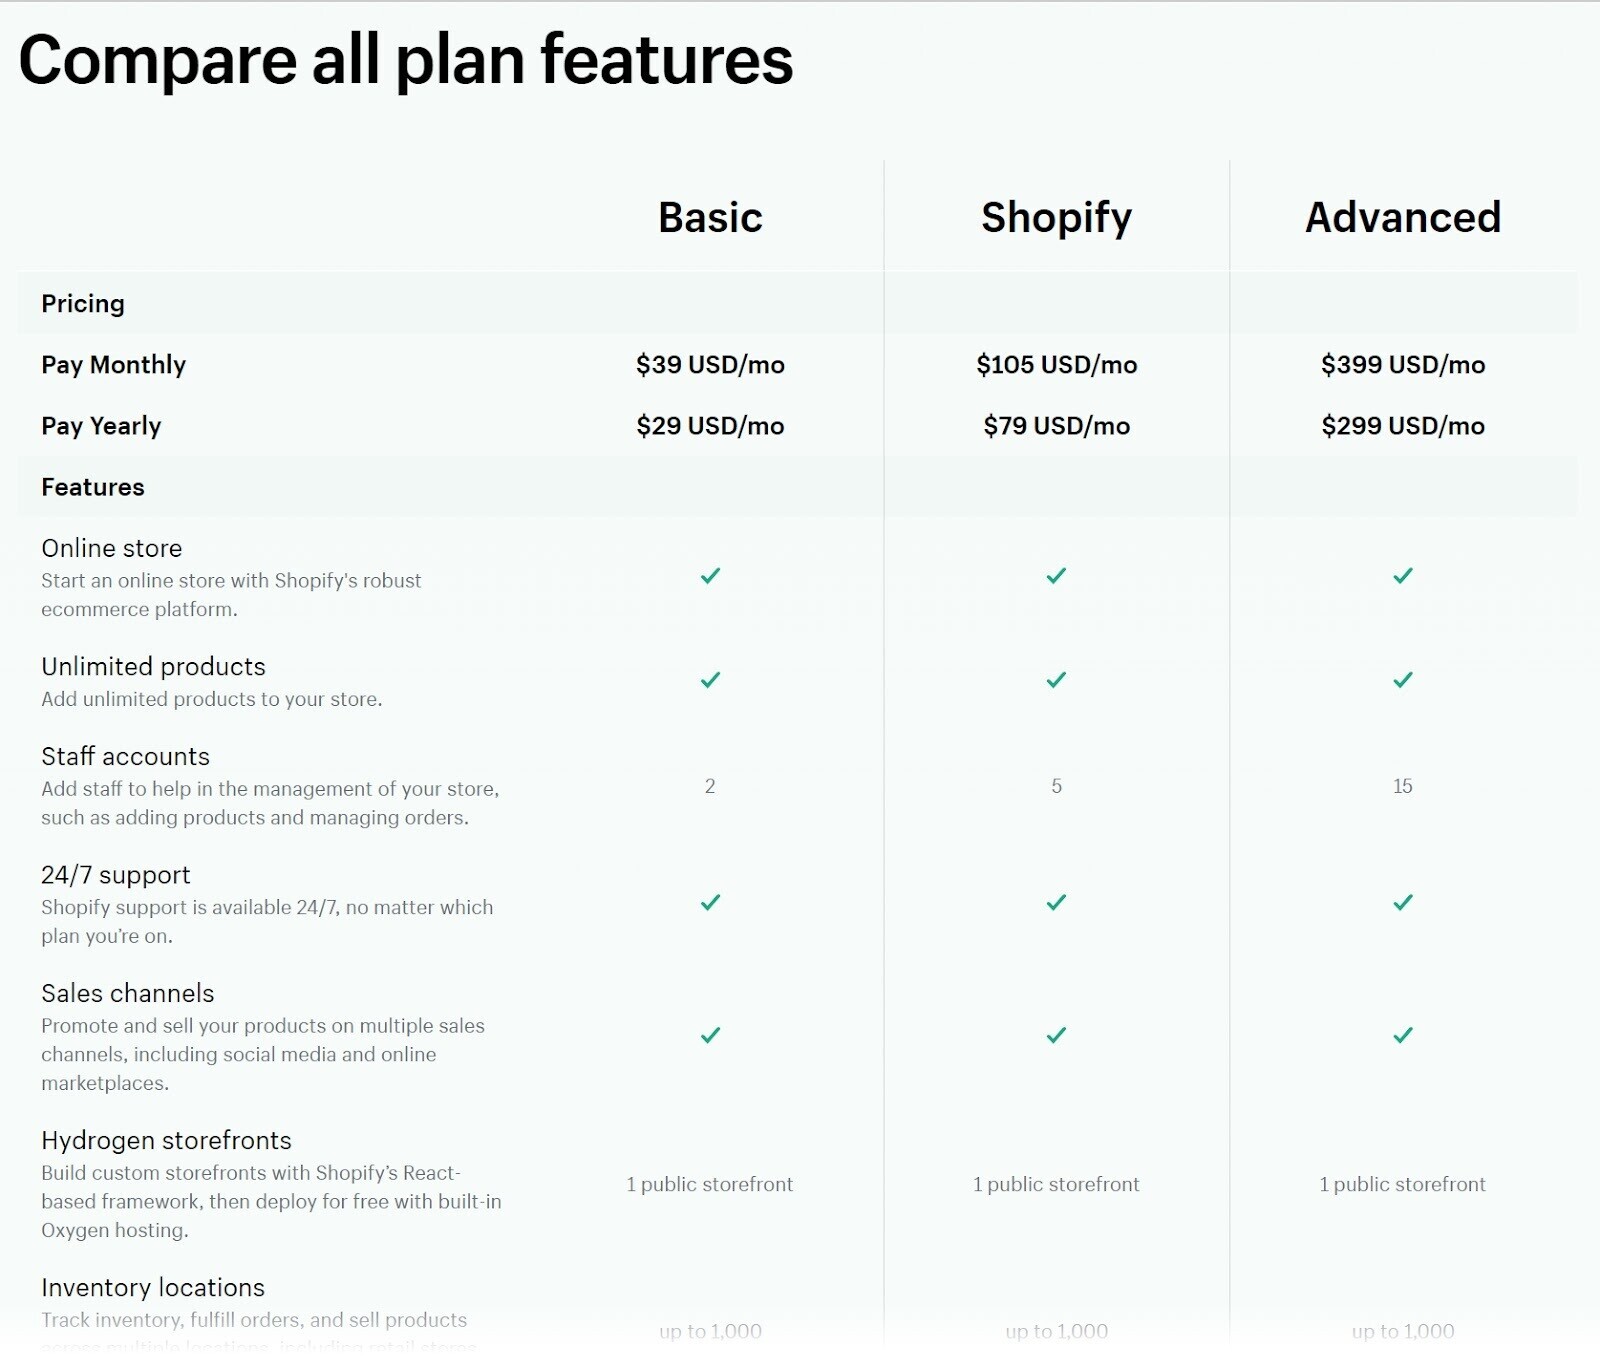 "Compare all plan features" section of Shopify